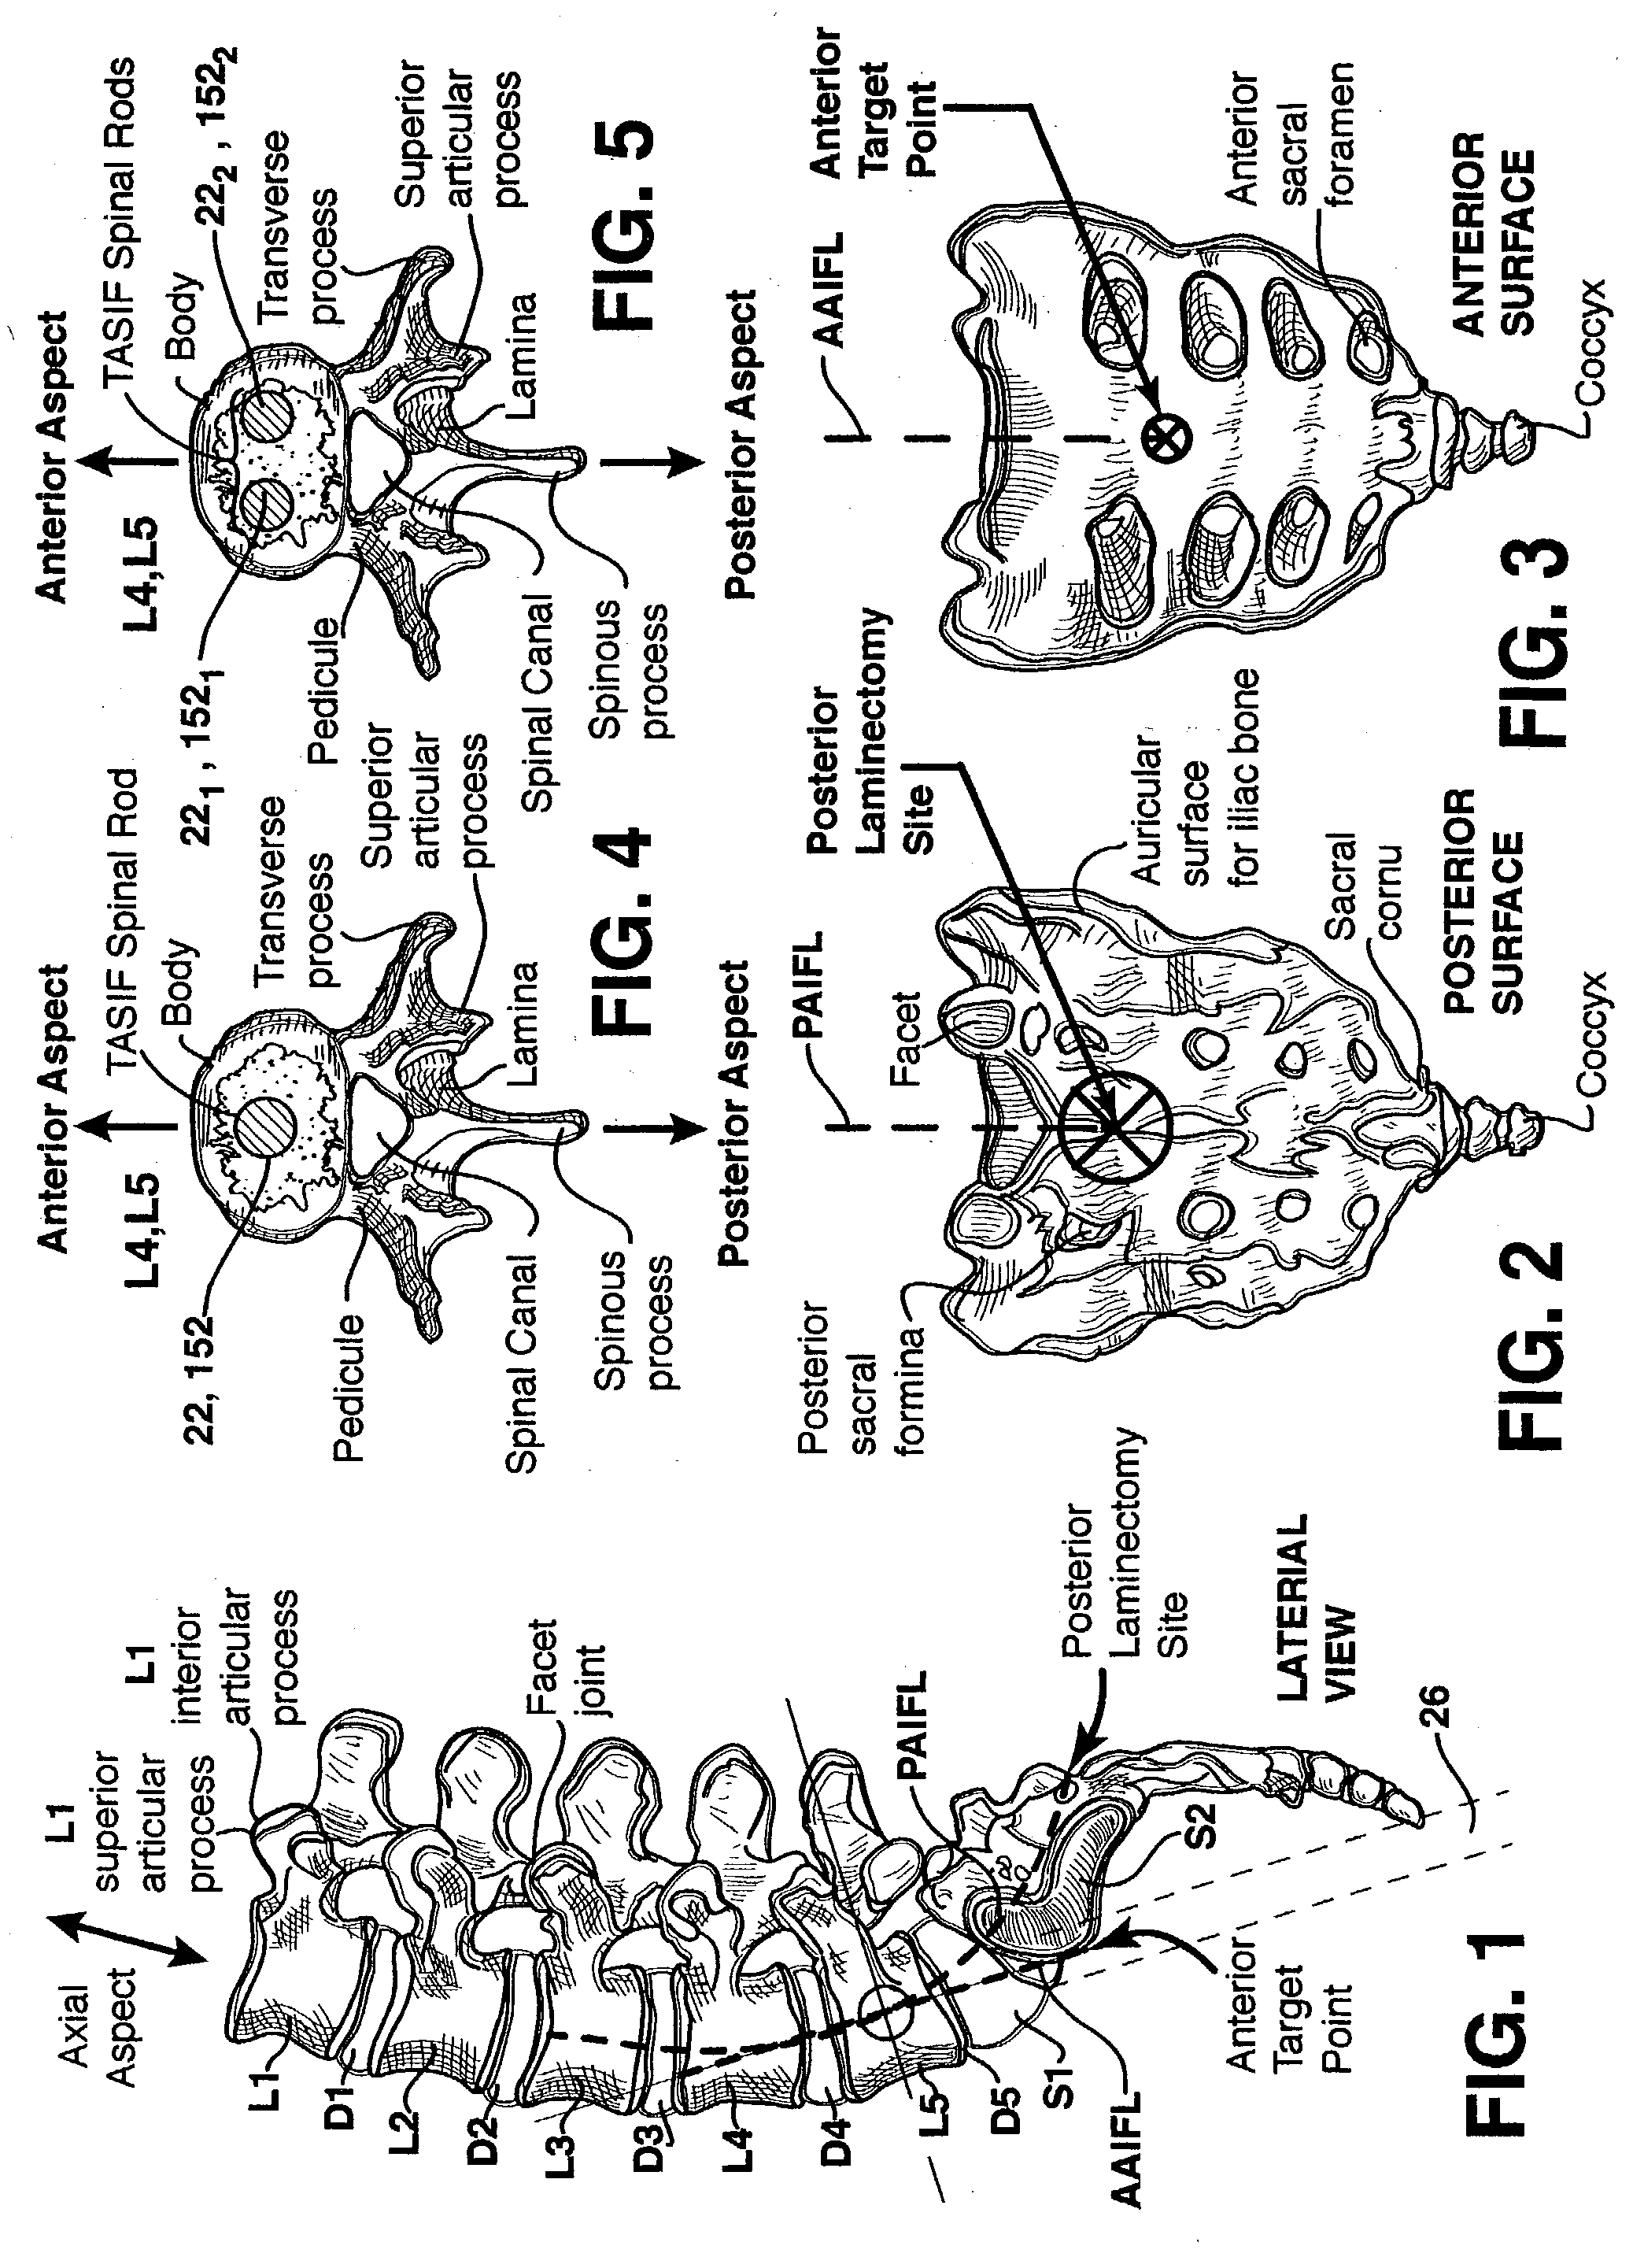 Axial spinal implant and method and apparatus for implanting an axial spinal implant within the vertebrae of the spine